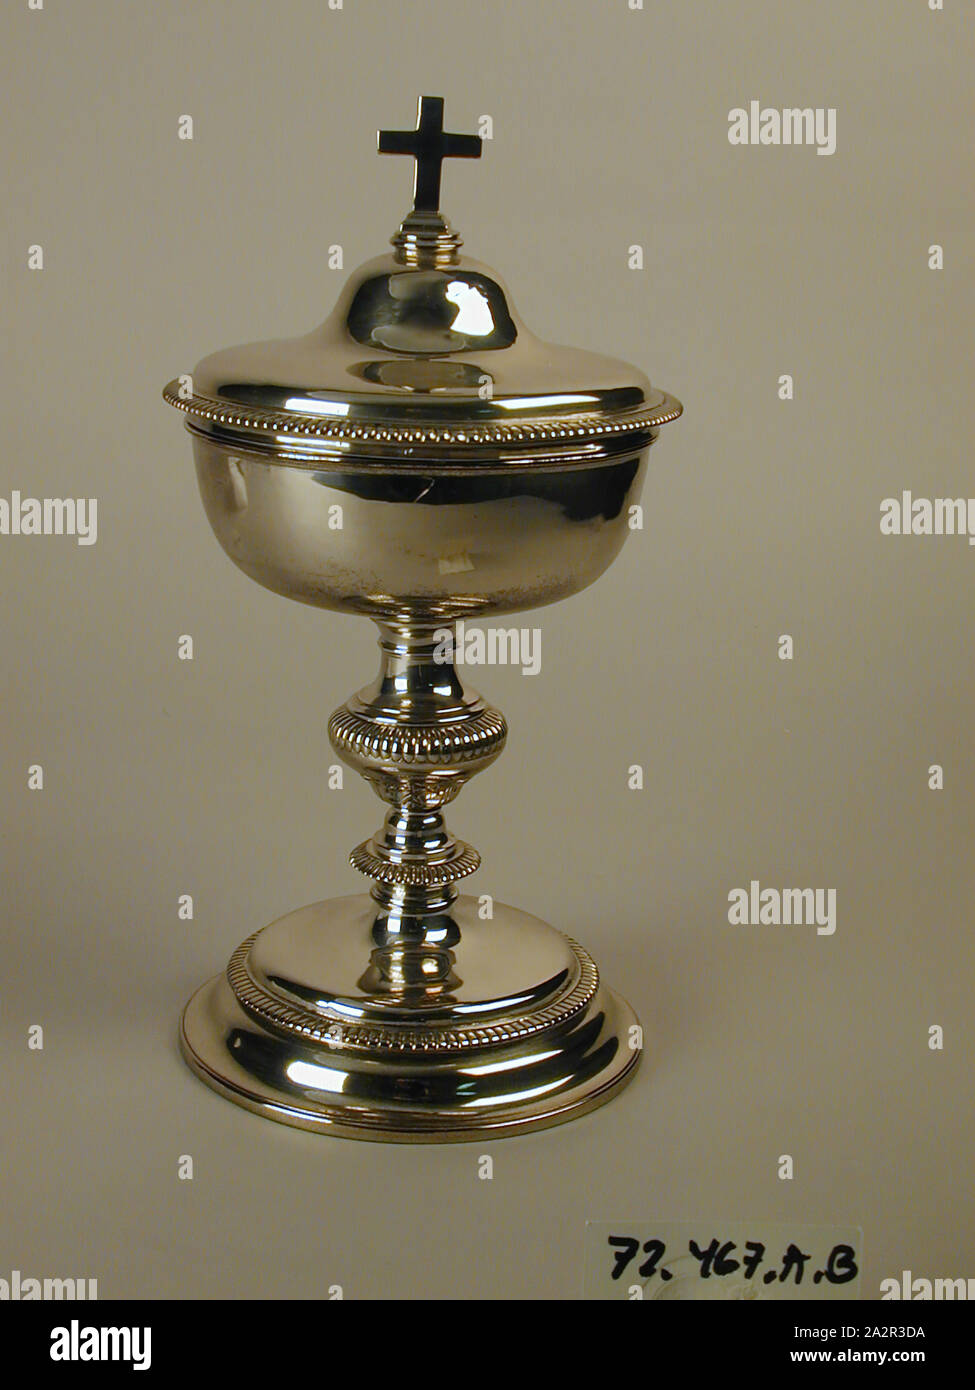 Robert Cruickshank, Canadian, active 1774 - 1809, Guillaume Loir, French, active 1716 - 1769, Ciborium, ca. 1790, silver, Overall: 9 1/2 inches × 5 inches (24.1 × 12.7 cm Stock Photo